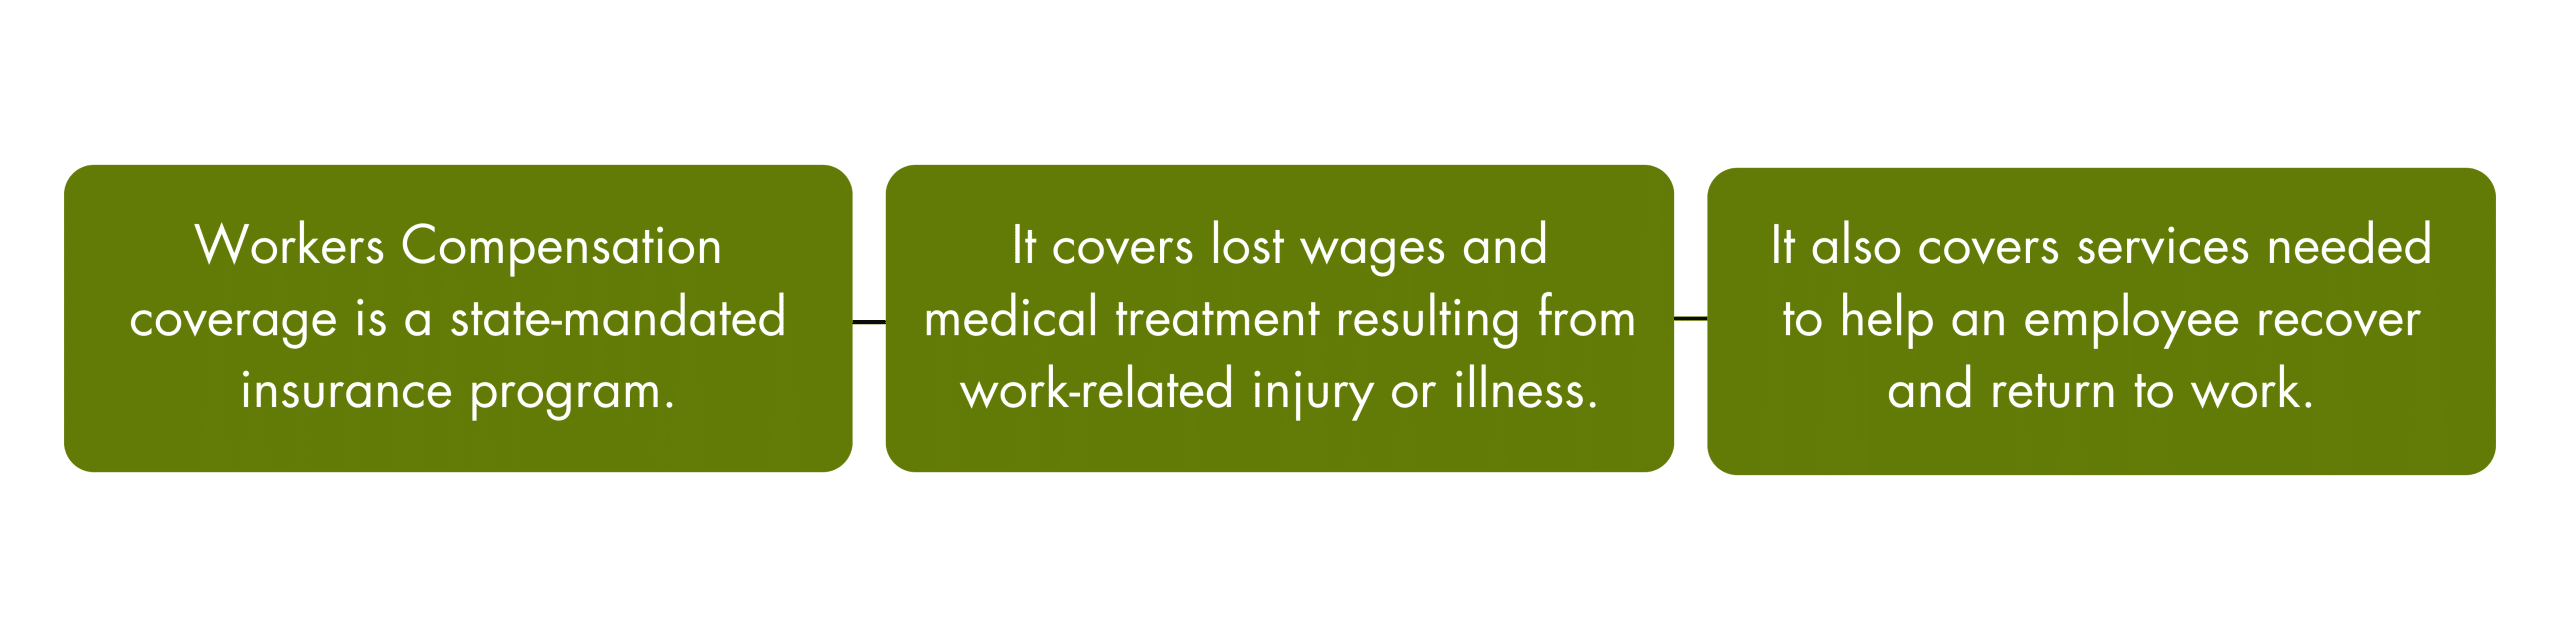 It covers lost wages and medical treatment resulting from an employee’s work-related injury or illness. (72 x 18 in)